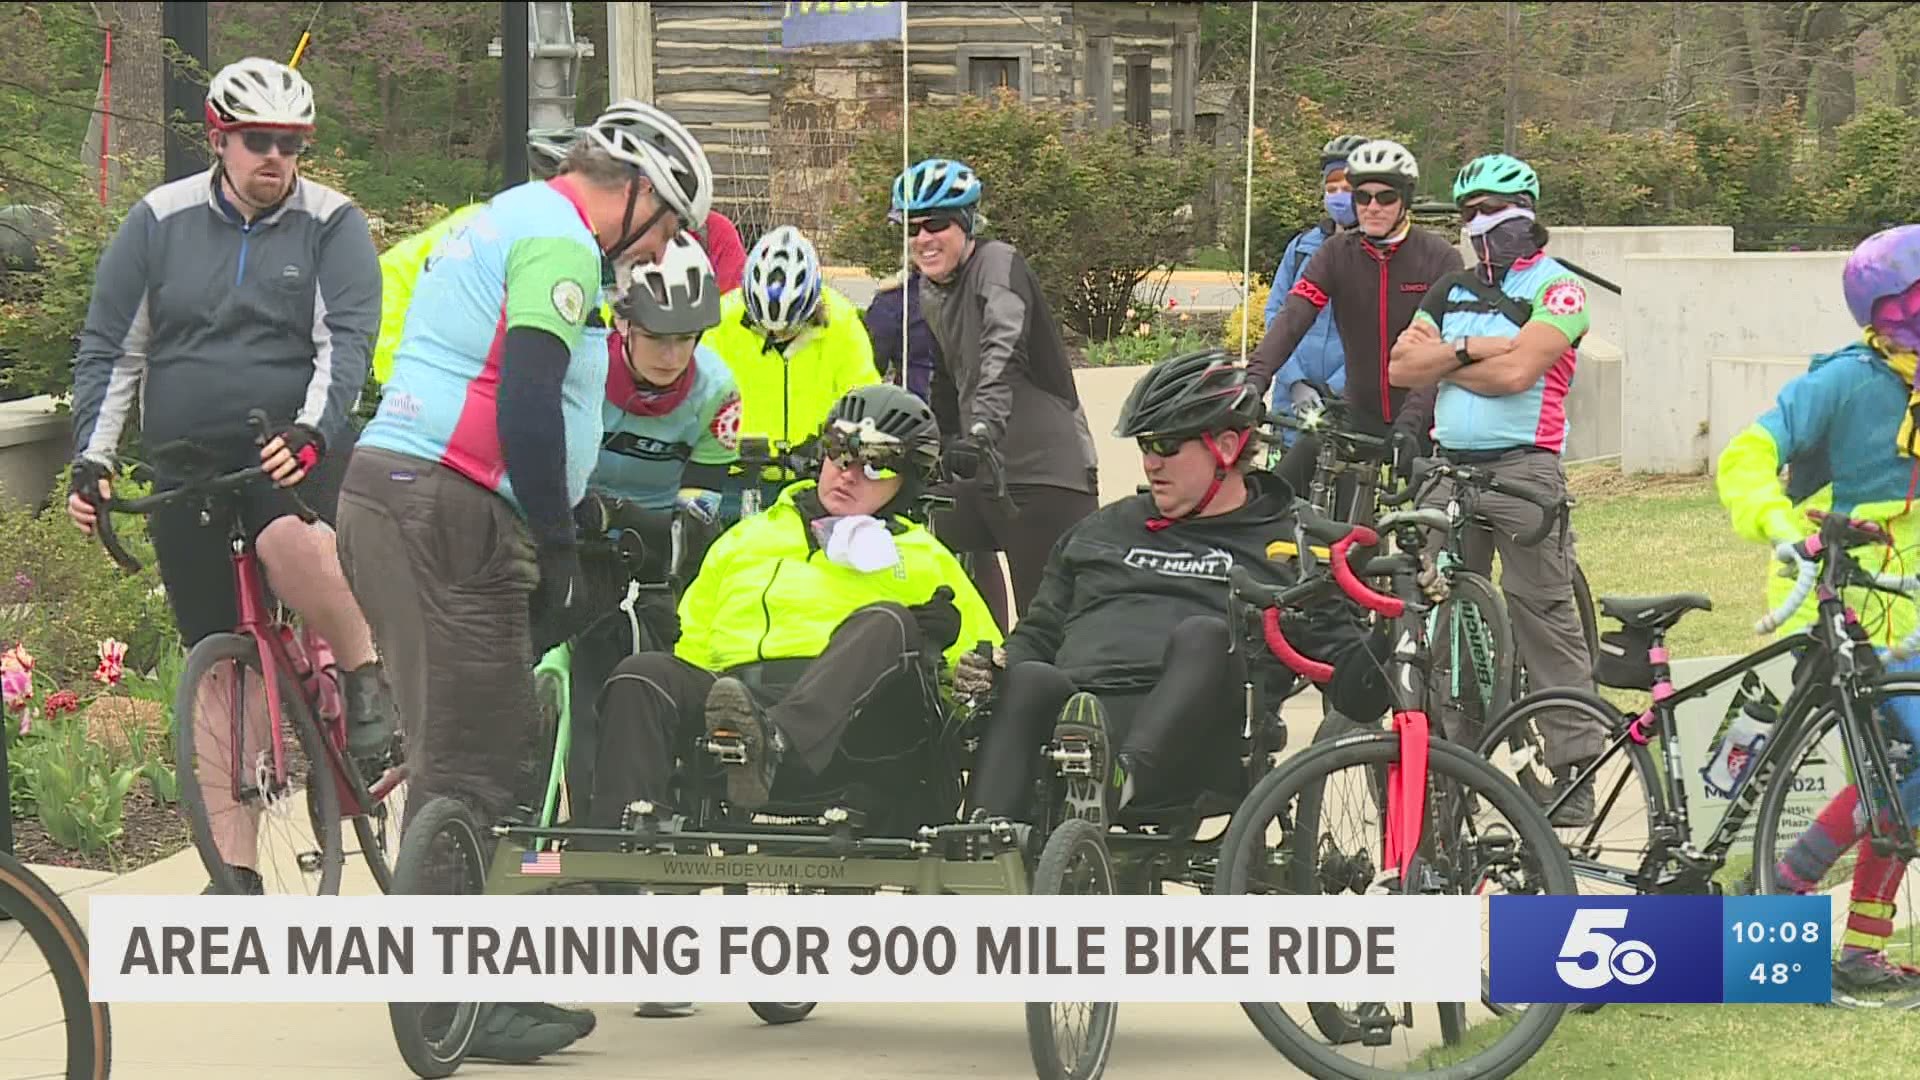 Josh Fohner, 31 of Springdale is training for the bike ride of a lifetime after suffering from a traumatic brain injury in 2016.